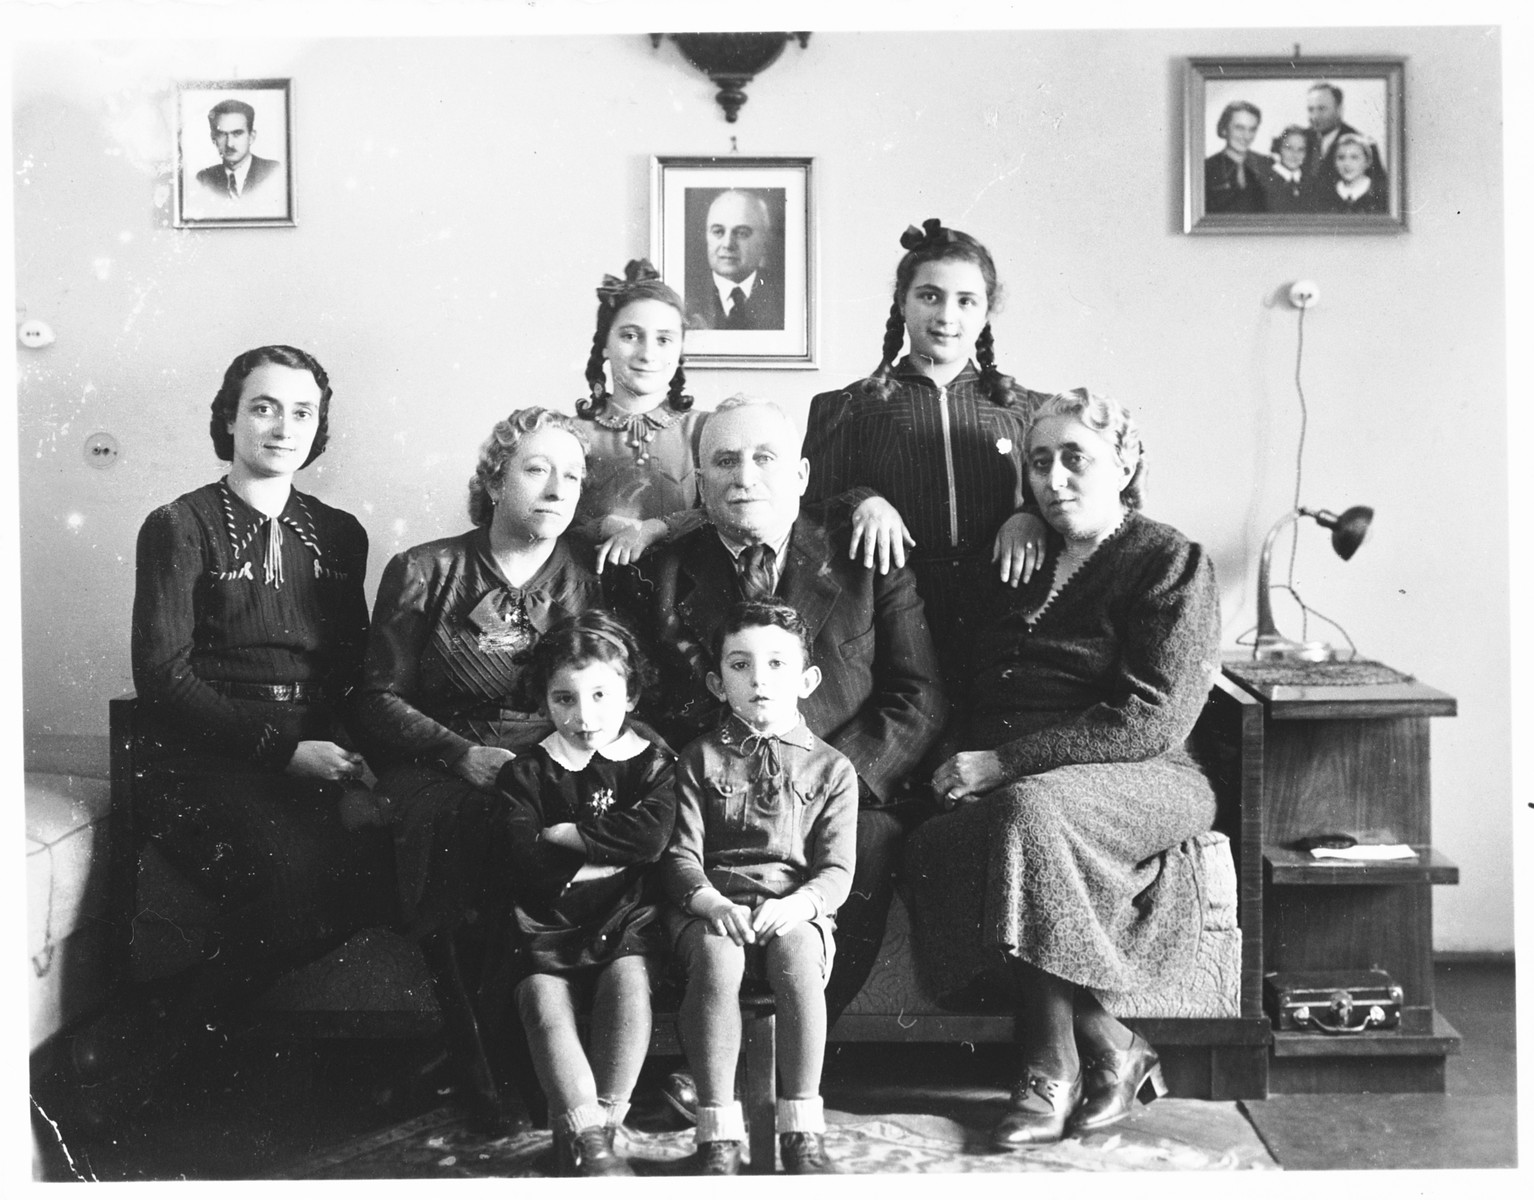 A Jewish family poses in their apartment with two young Jewish children they are taking care of, who were recently released from the Djakovo concentration camp.

Pictured are members of the Spitzer family shortly before the deportation of the Jewish community of Osijek. Standing in the back row, form left to right are Leah and Miriam Spitzer; in the middle row are Ilonka Spitzer, Riza Krasso and Mr. and Mrs. Spitzer, the parents of Marko Spitzer.  At the time of this photograph, Marko Spitzer was already in a POW camp, and Alfred Krasso was imprisoned in Jasenovac.